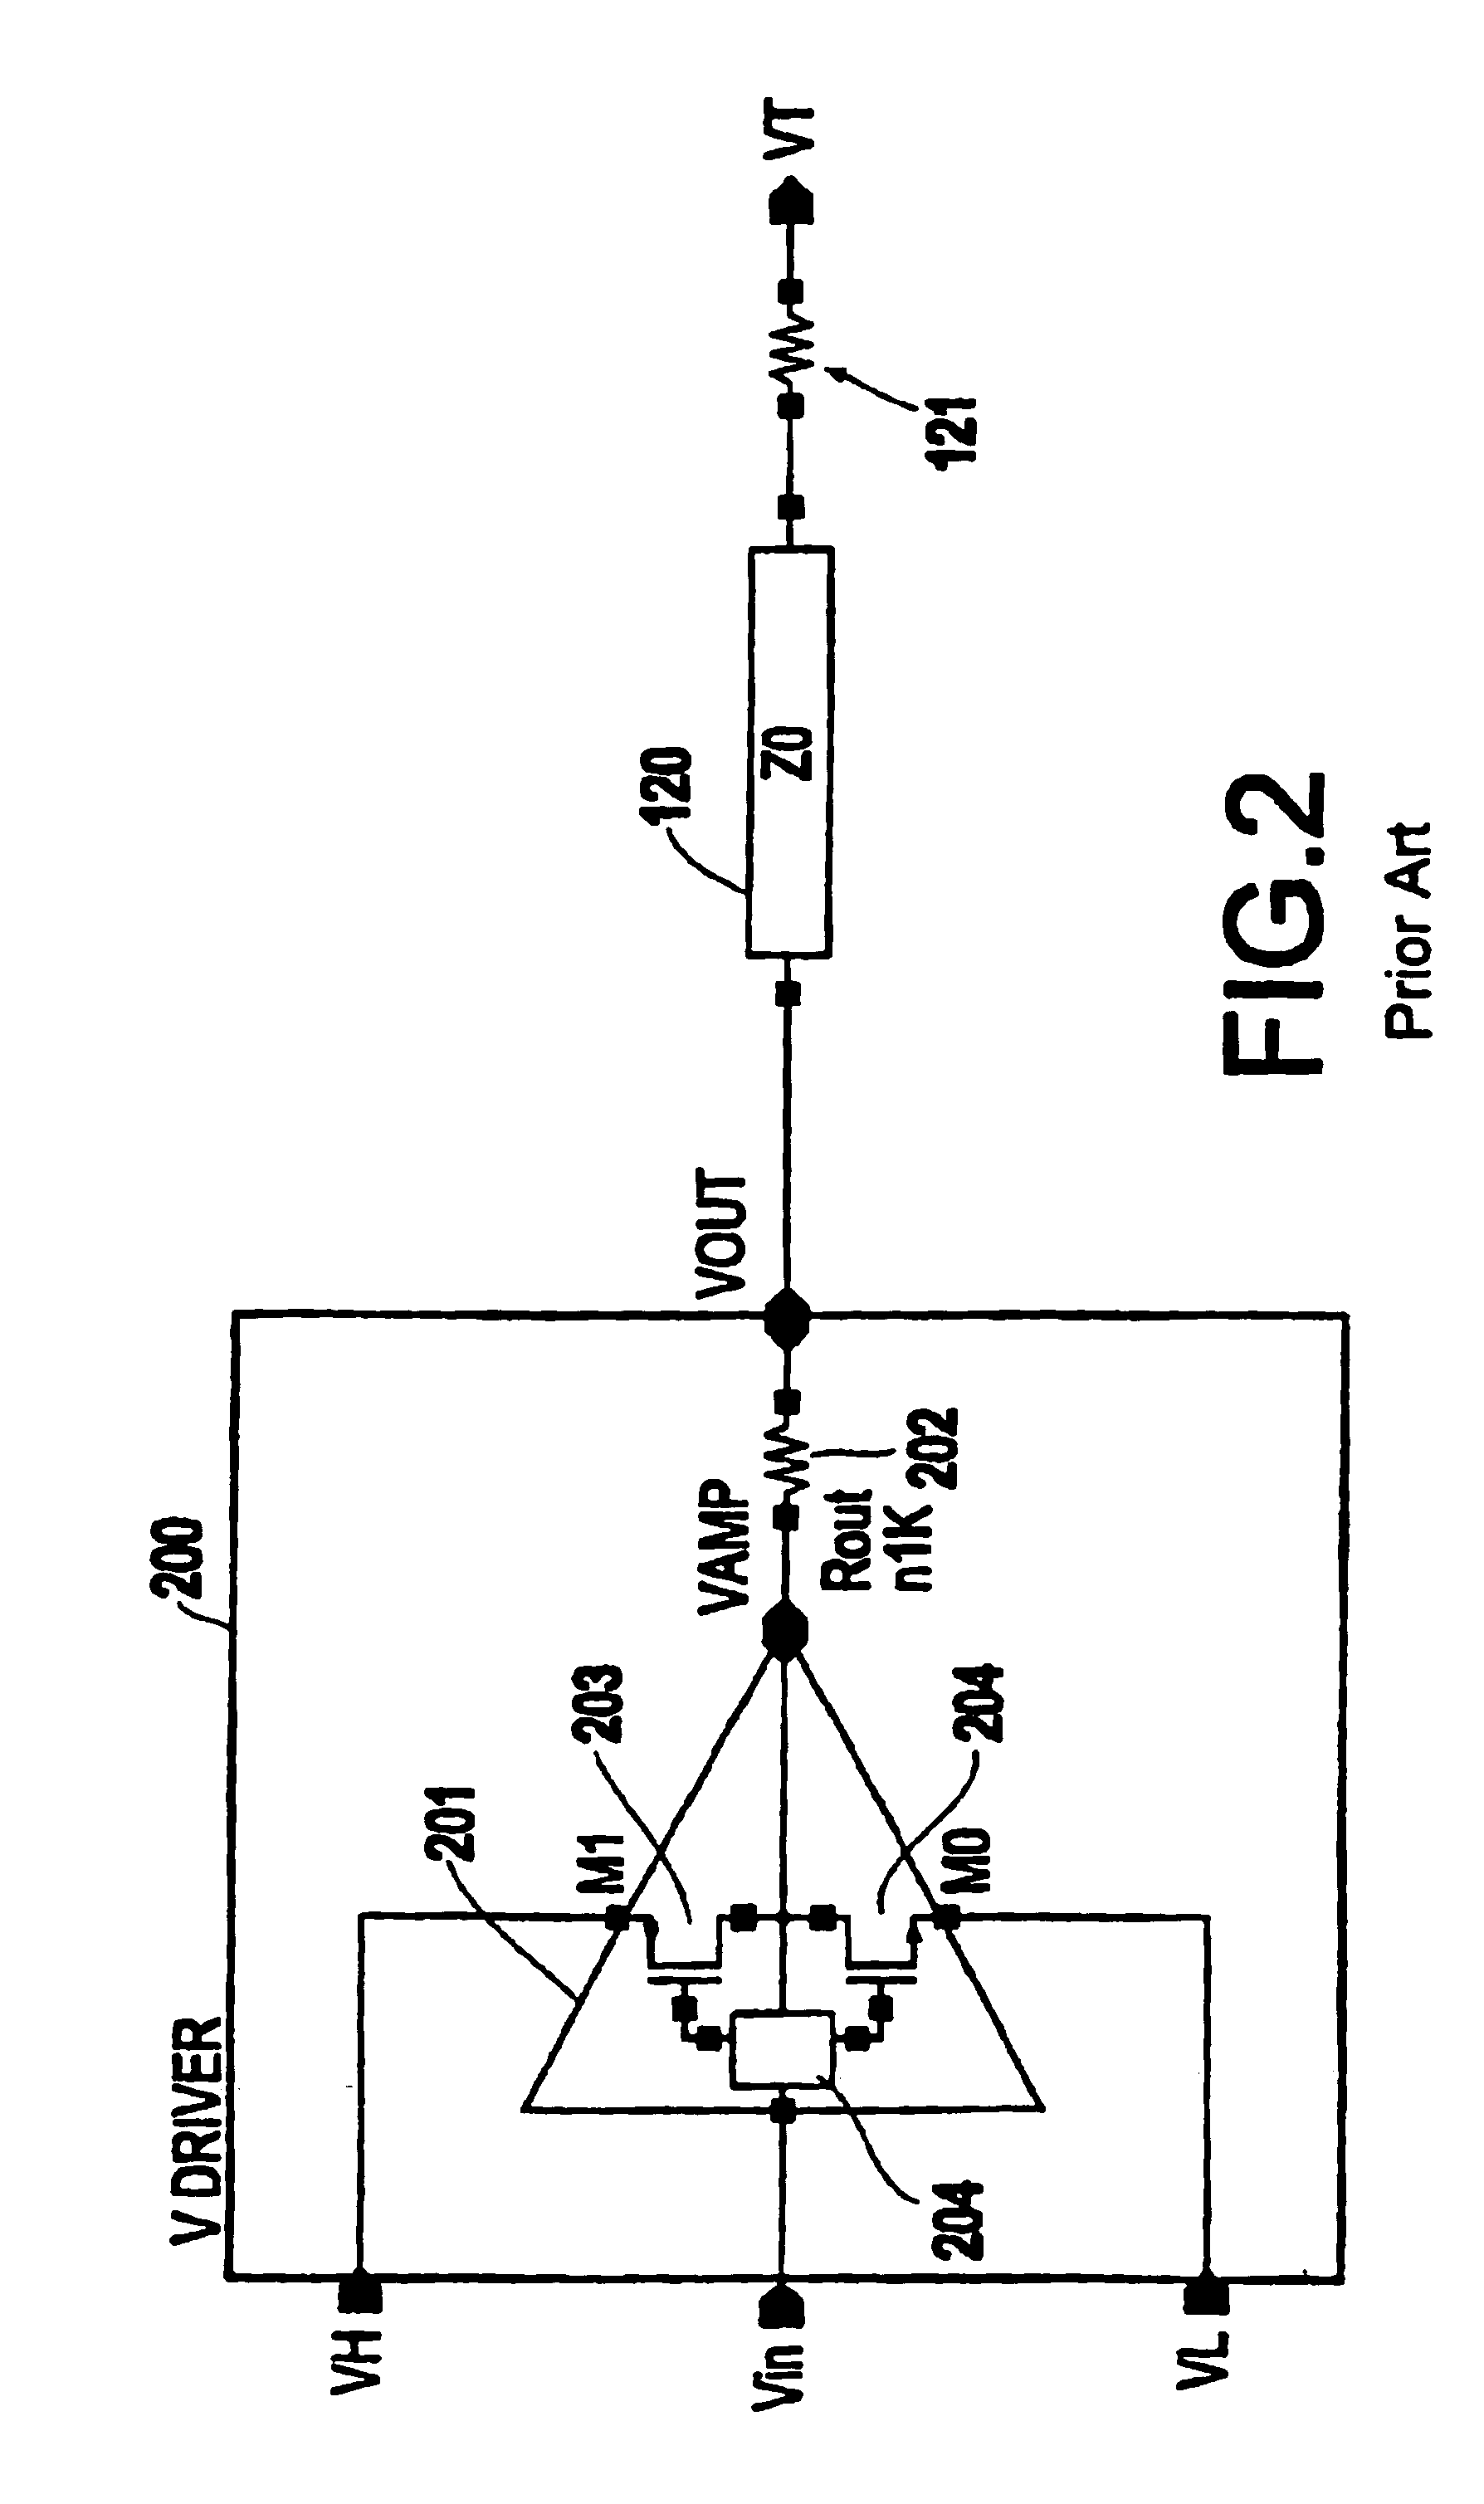 Terminating resistor driver for high speed data communication